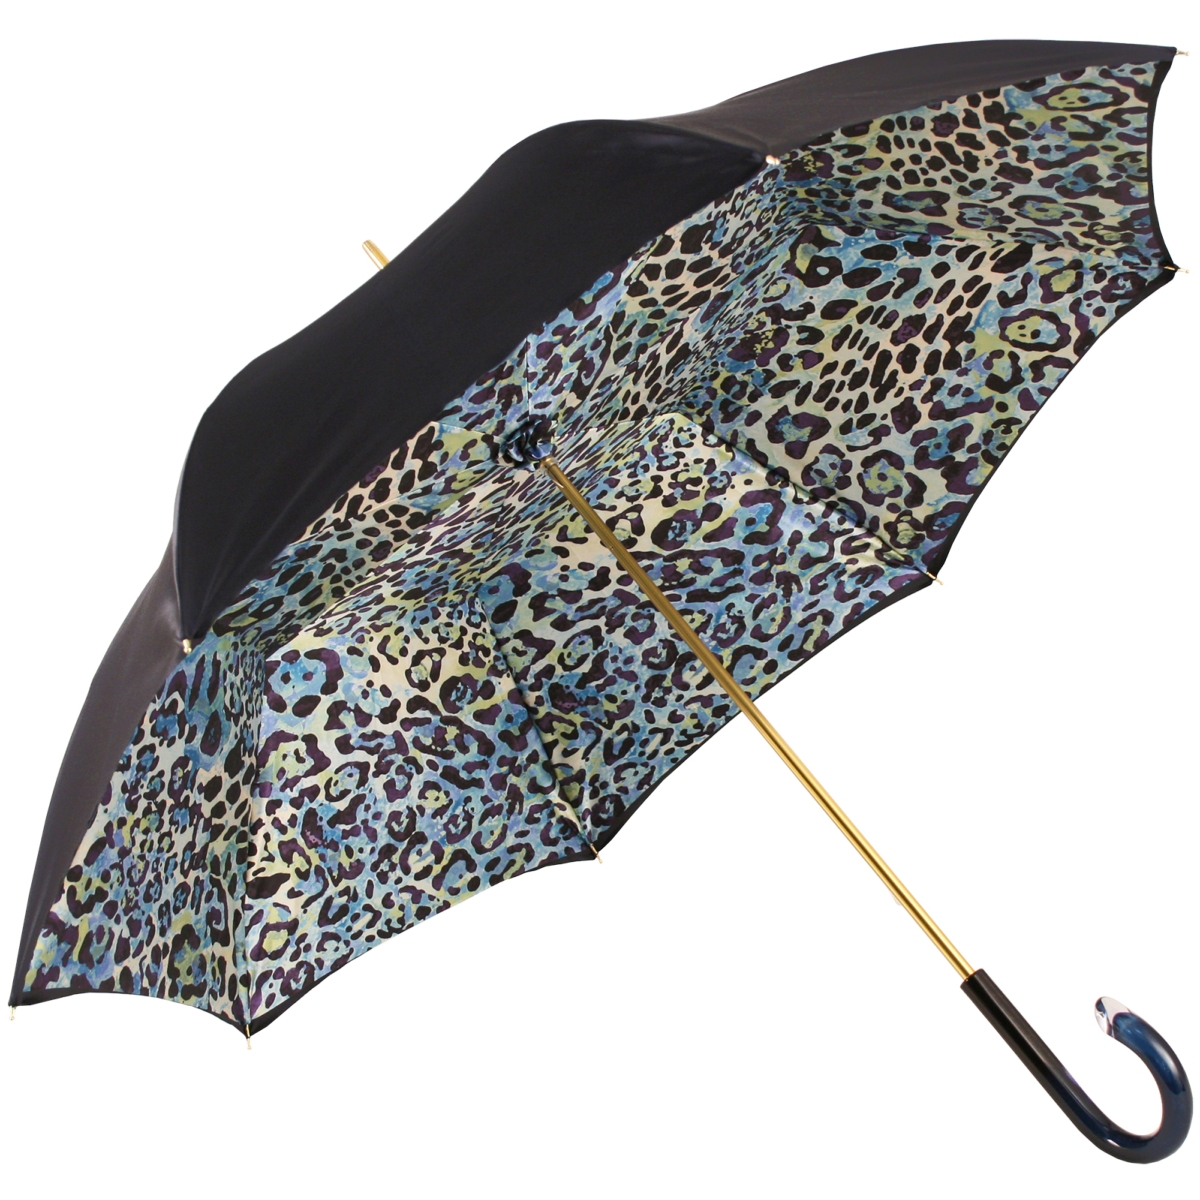 Glamour Leopard Navy Blue Luxury Double Canopy Umbrella by Pasotti